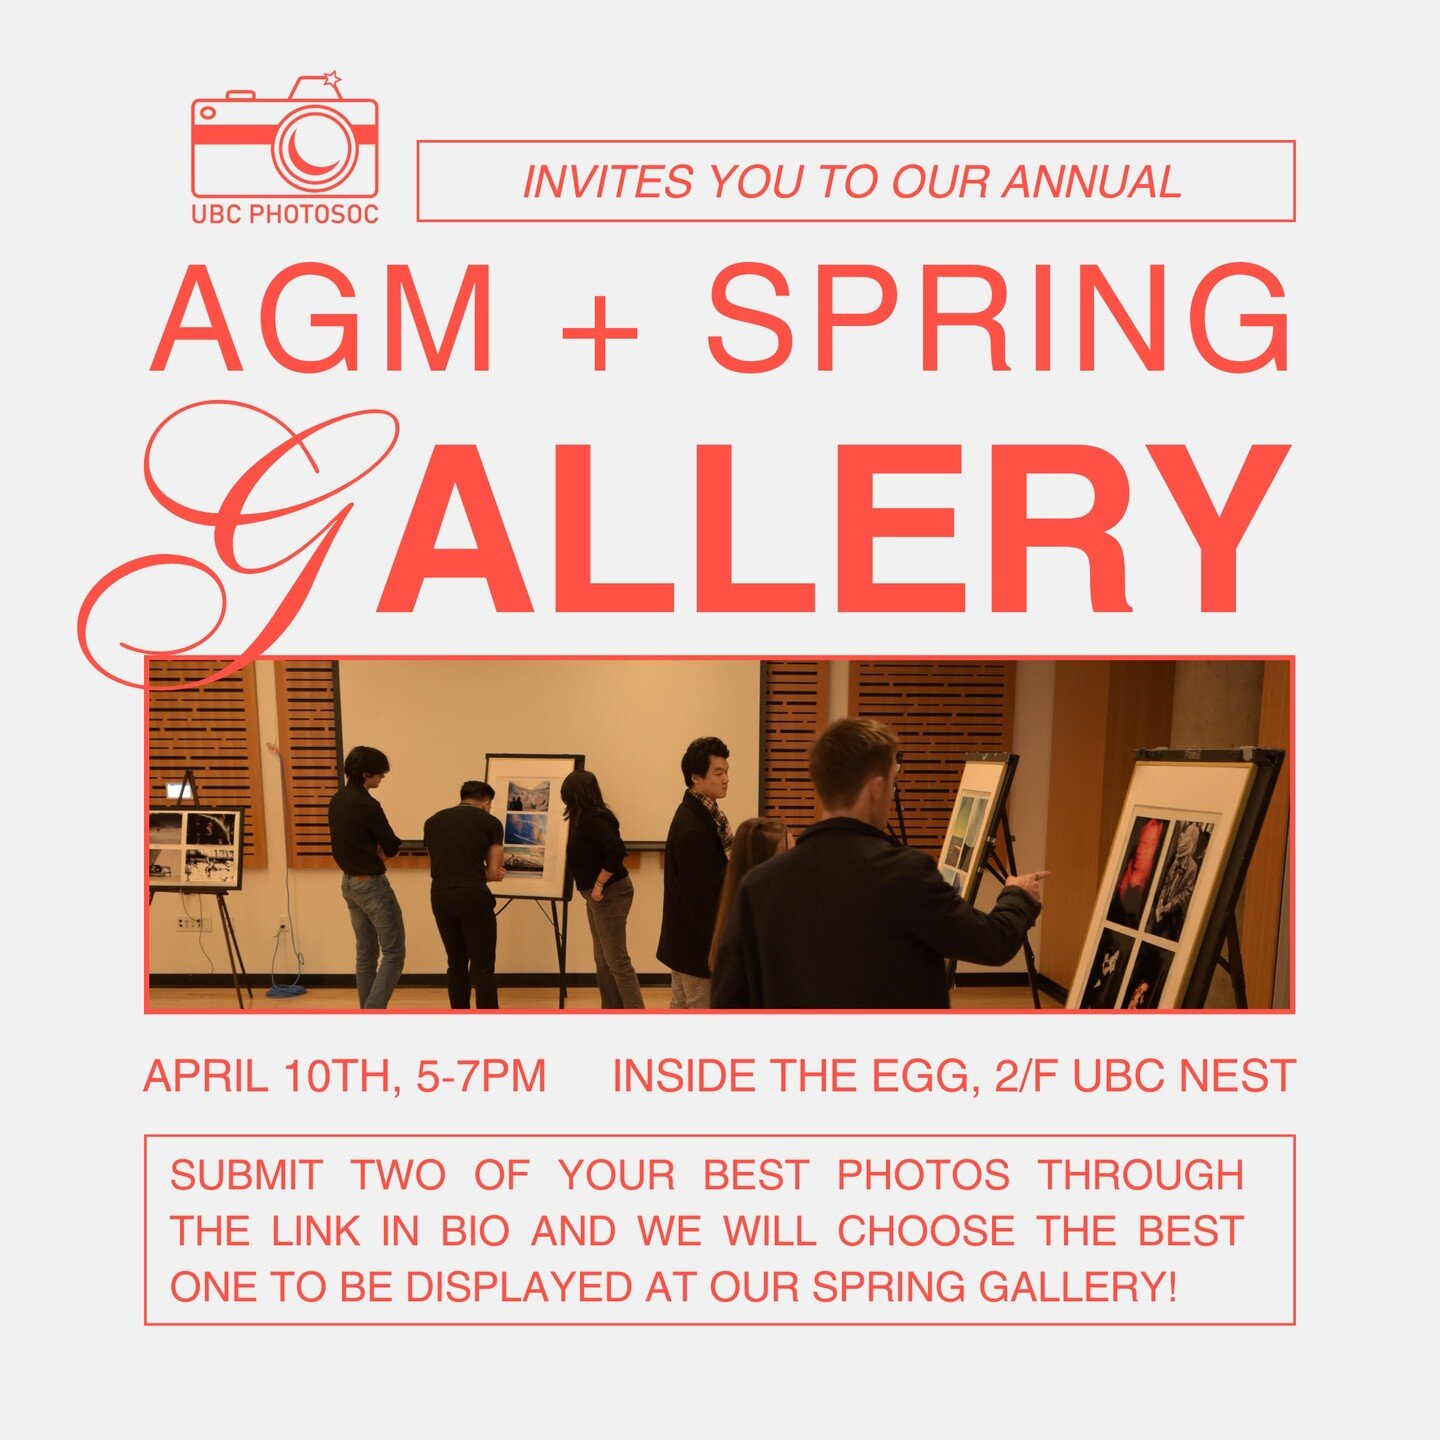 Hello Photosoc! We are happy to announce that we are preparing for the Spring Gallery! Come join us on April 10th to showcase your work and celebrate it with the rest of the club! ✨

For this gallery, we'd like you to send us two of your favourite sh